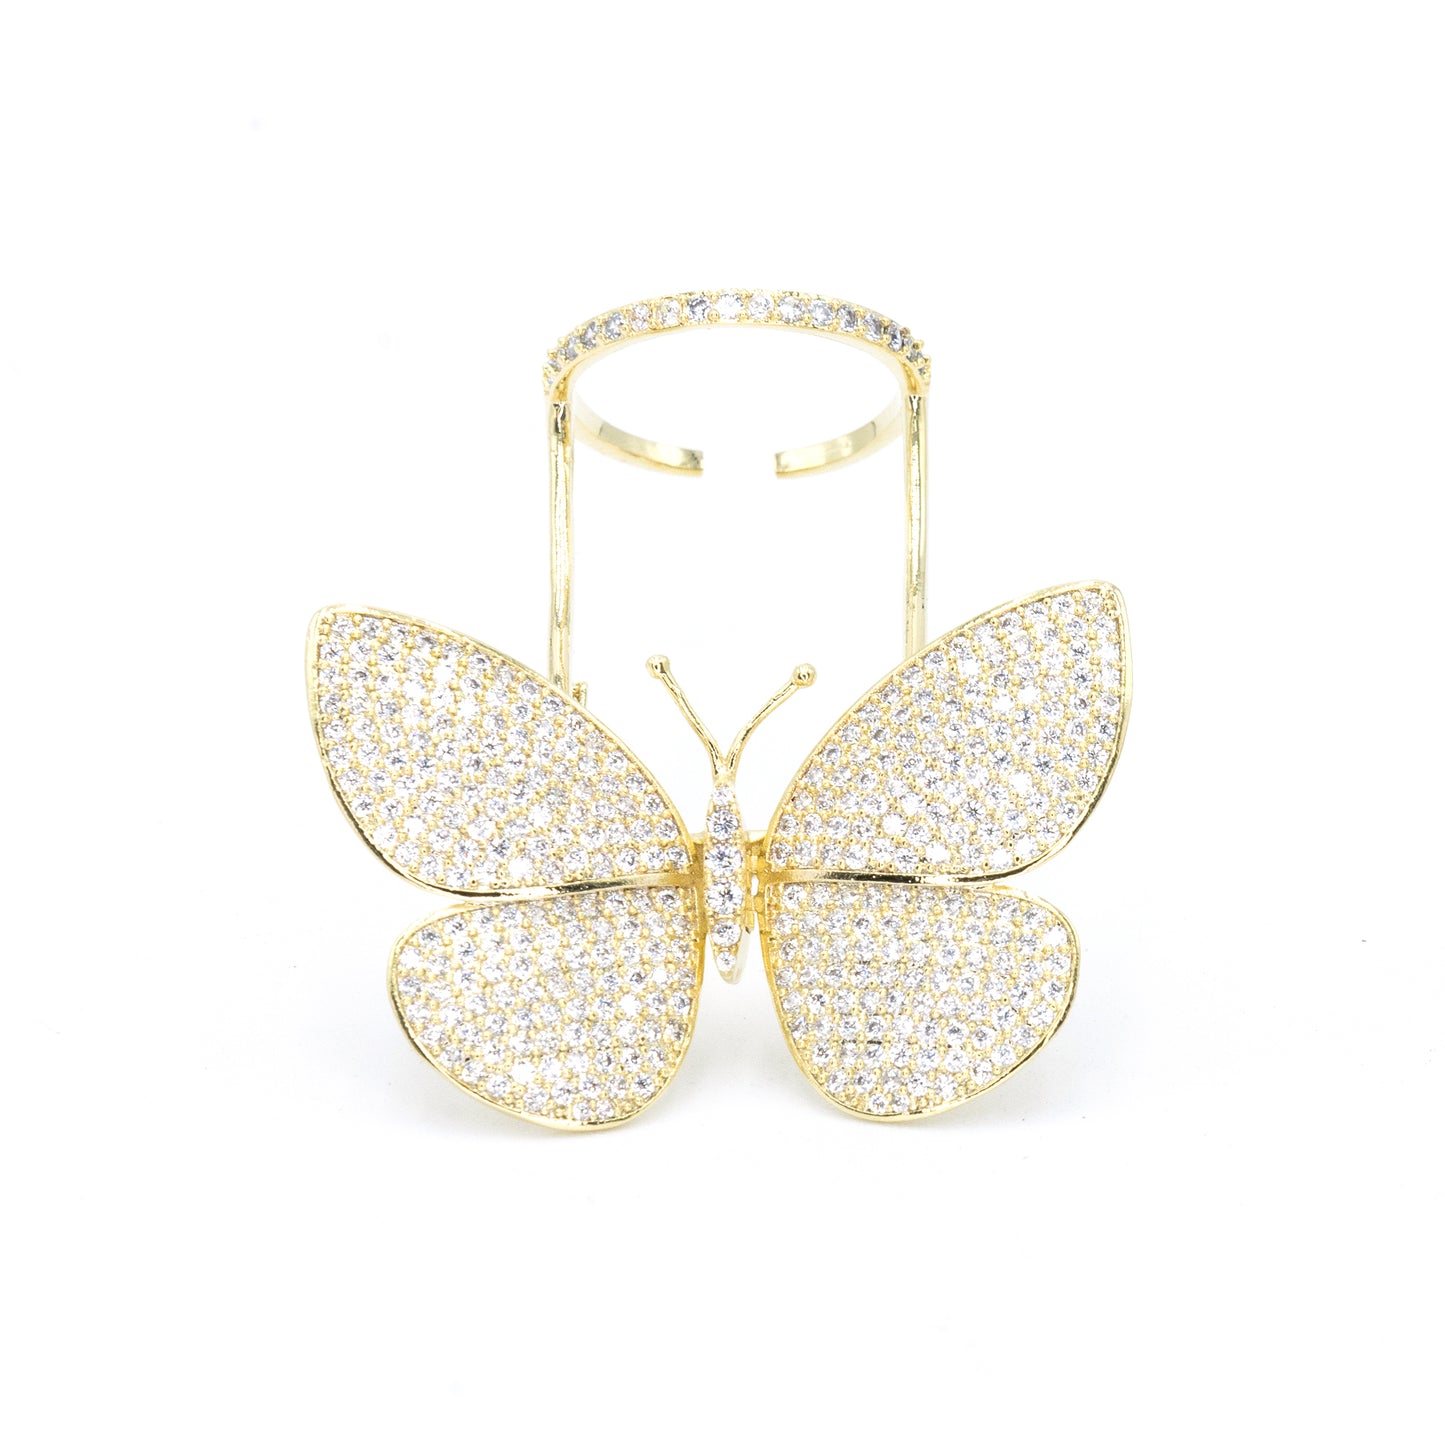 Moveable butterfly pave ring w/3A CZ stones rhodium G plated